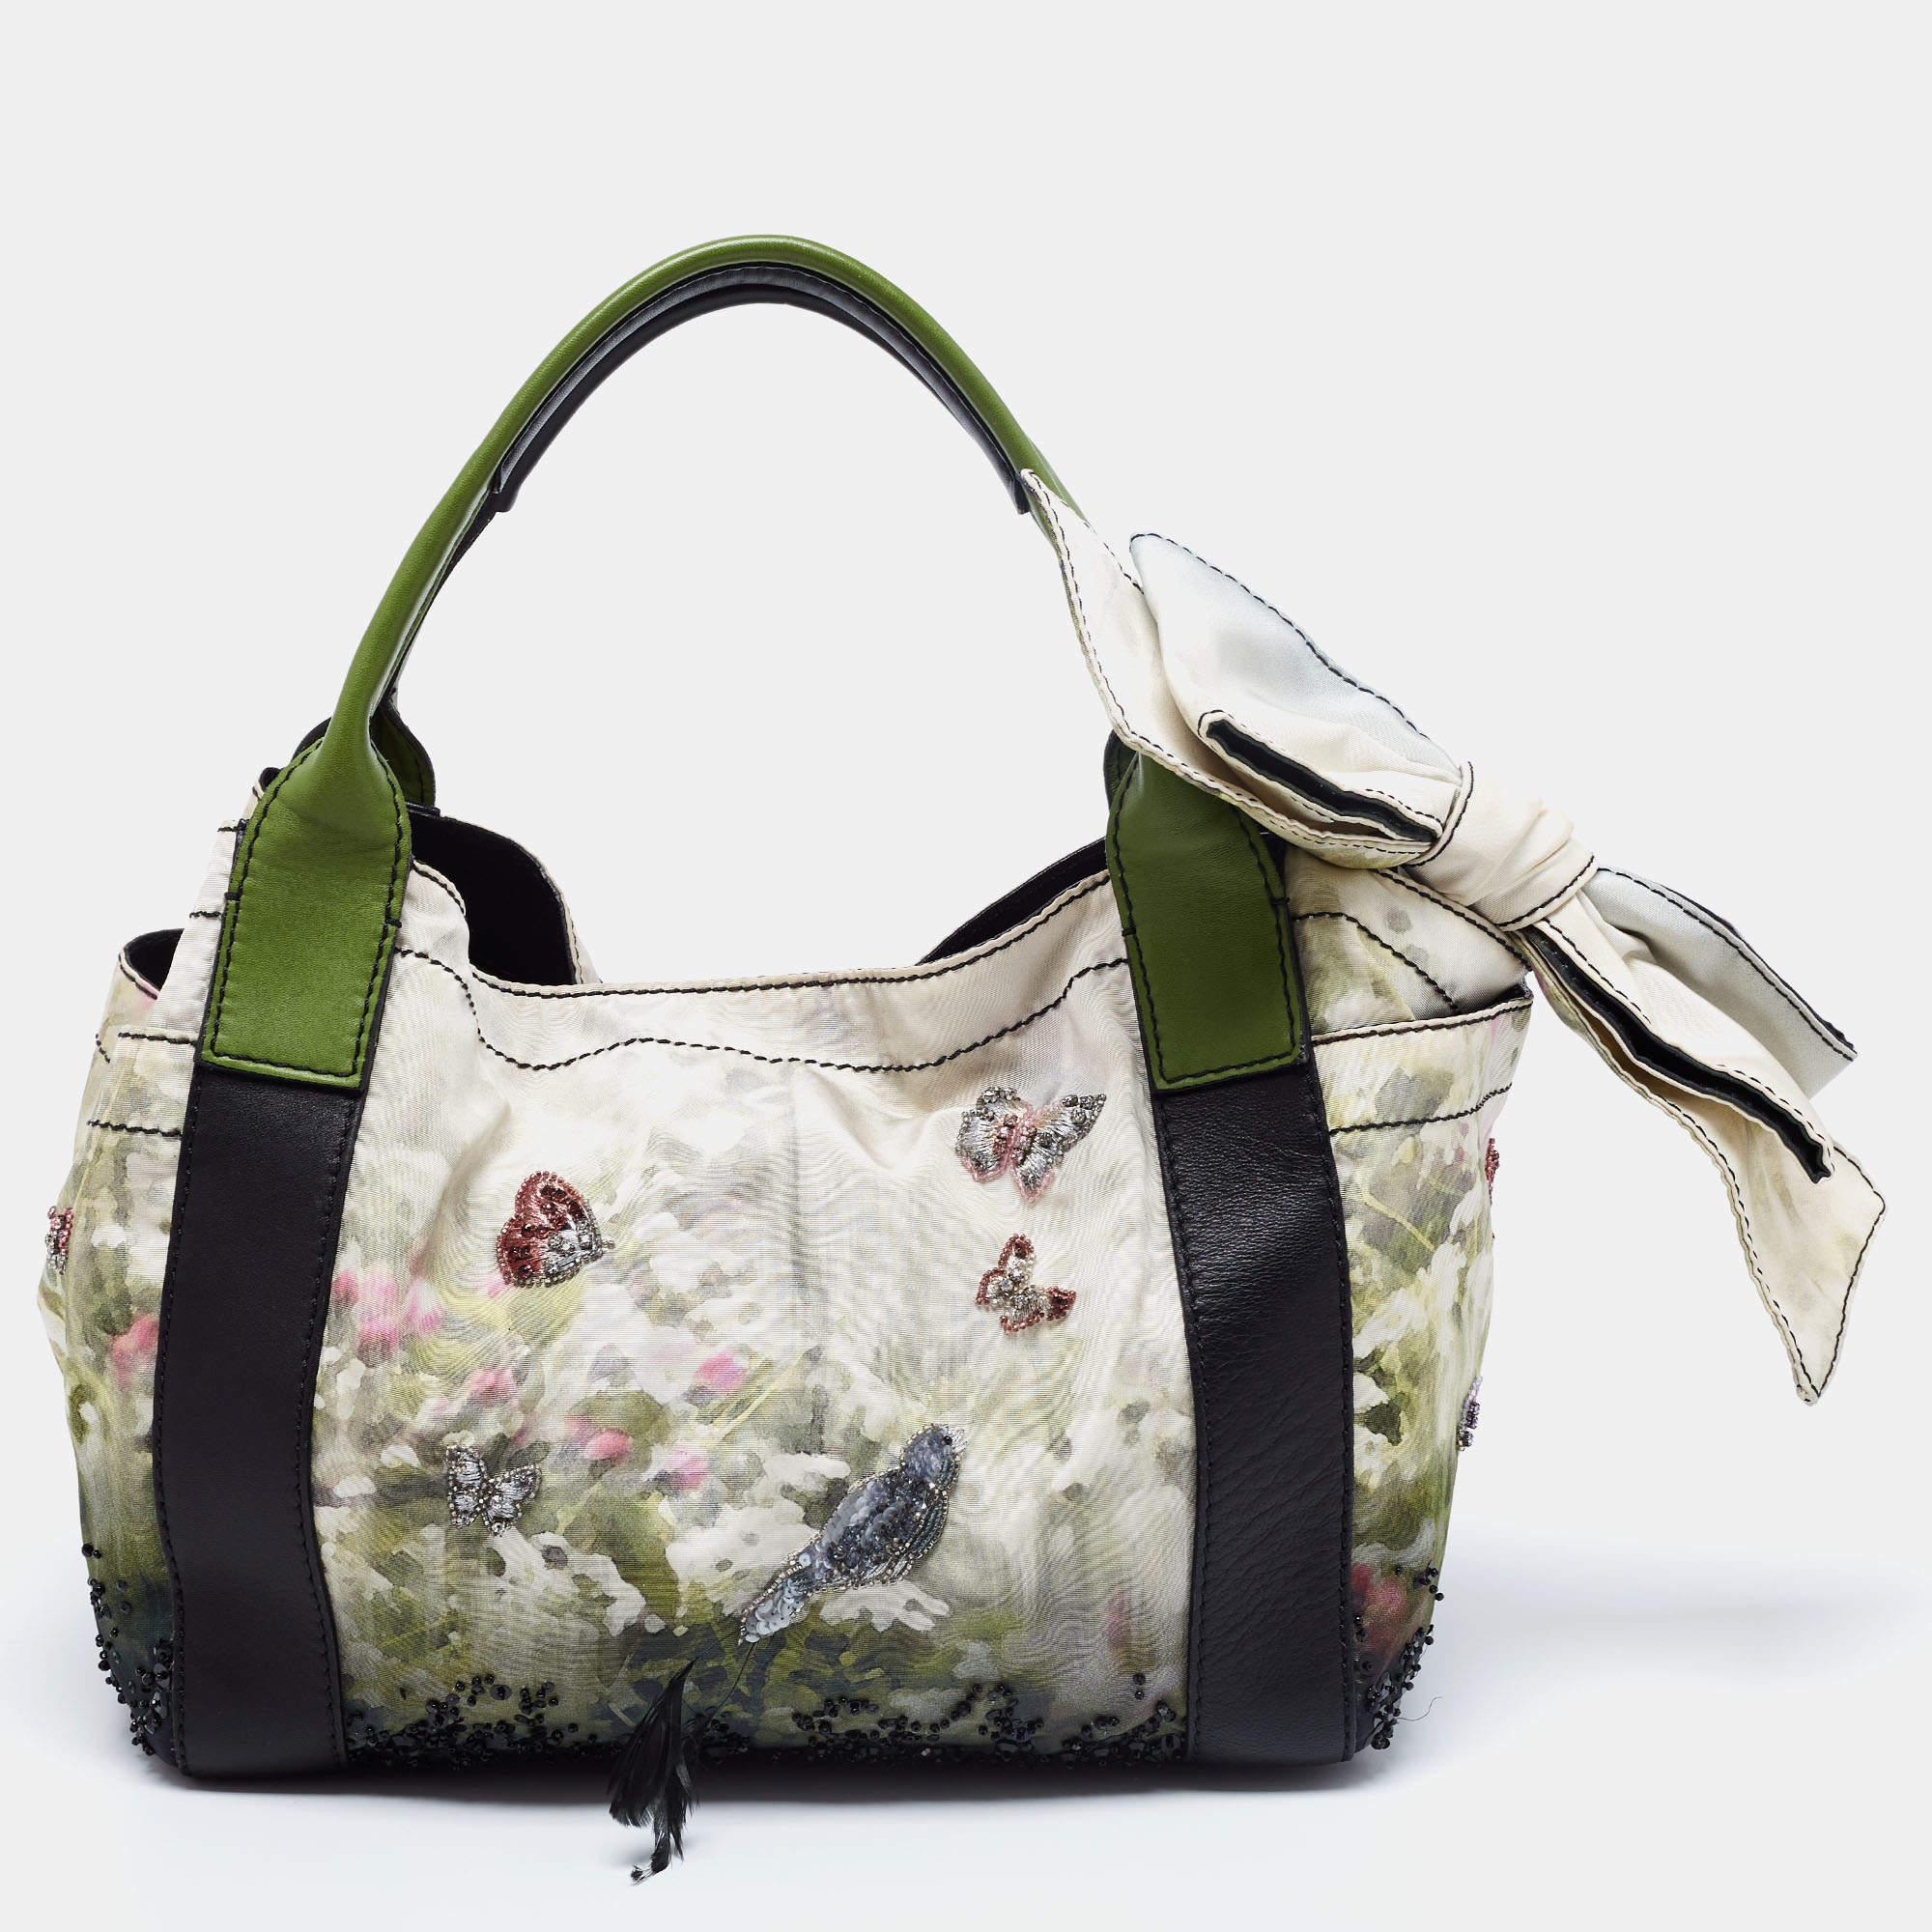 Get this lovely printed tote and carry it with style. This functional yet chic handbag by Valentino will surely meet all your expectations. It has two handles, a bow detail, side pockets, and a spacious interior for your belongings.

Includes: